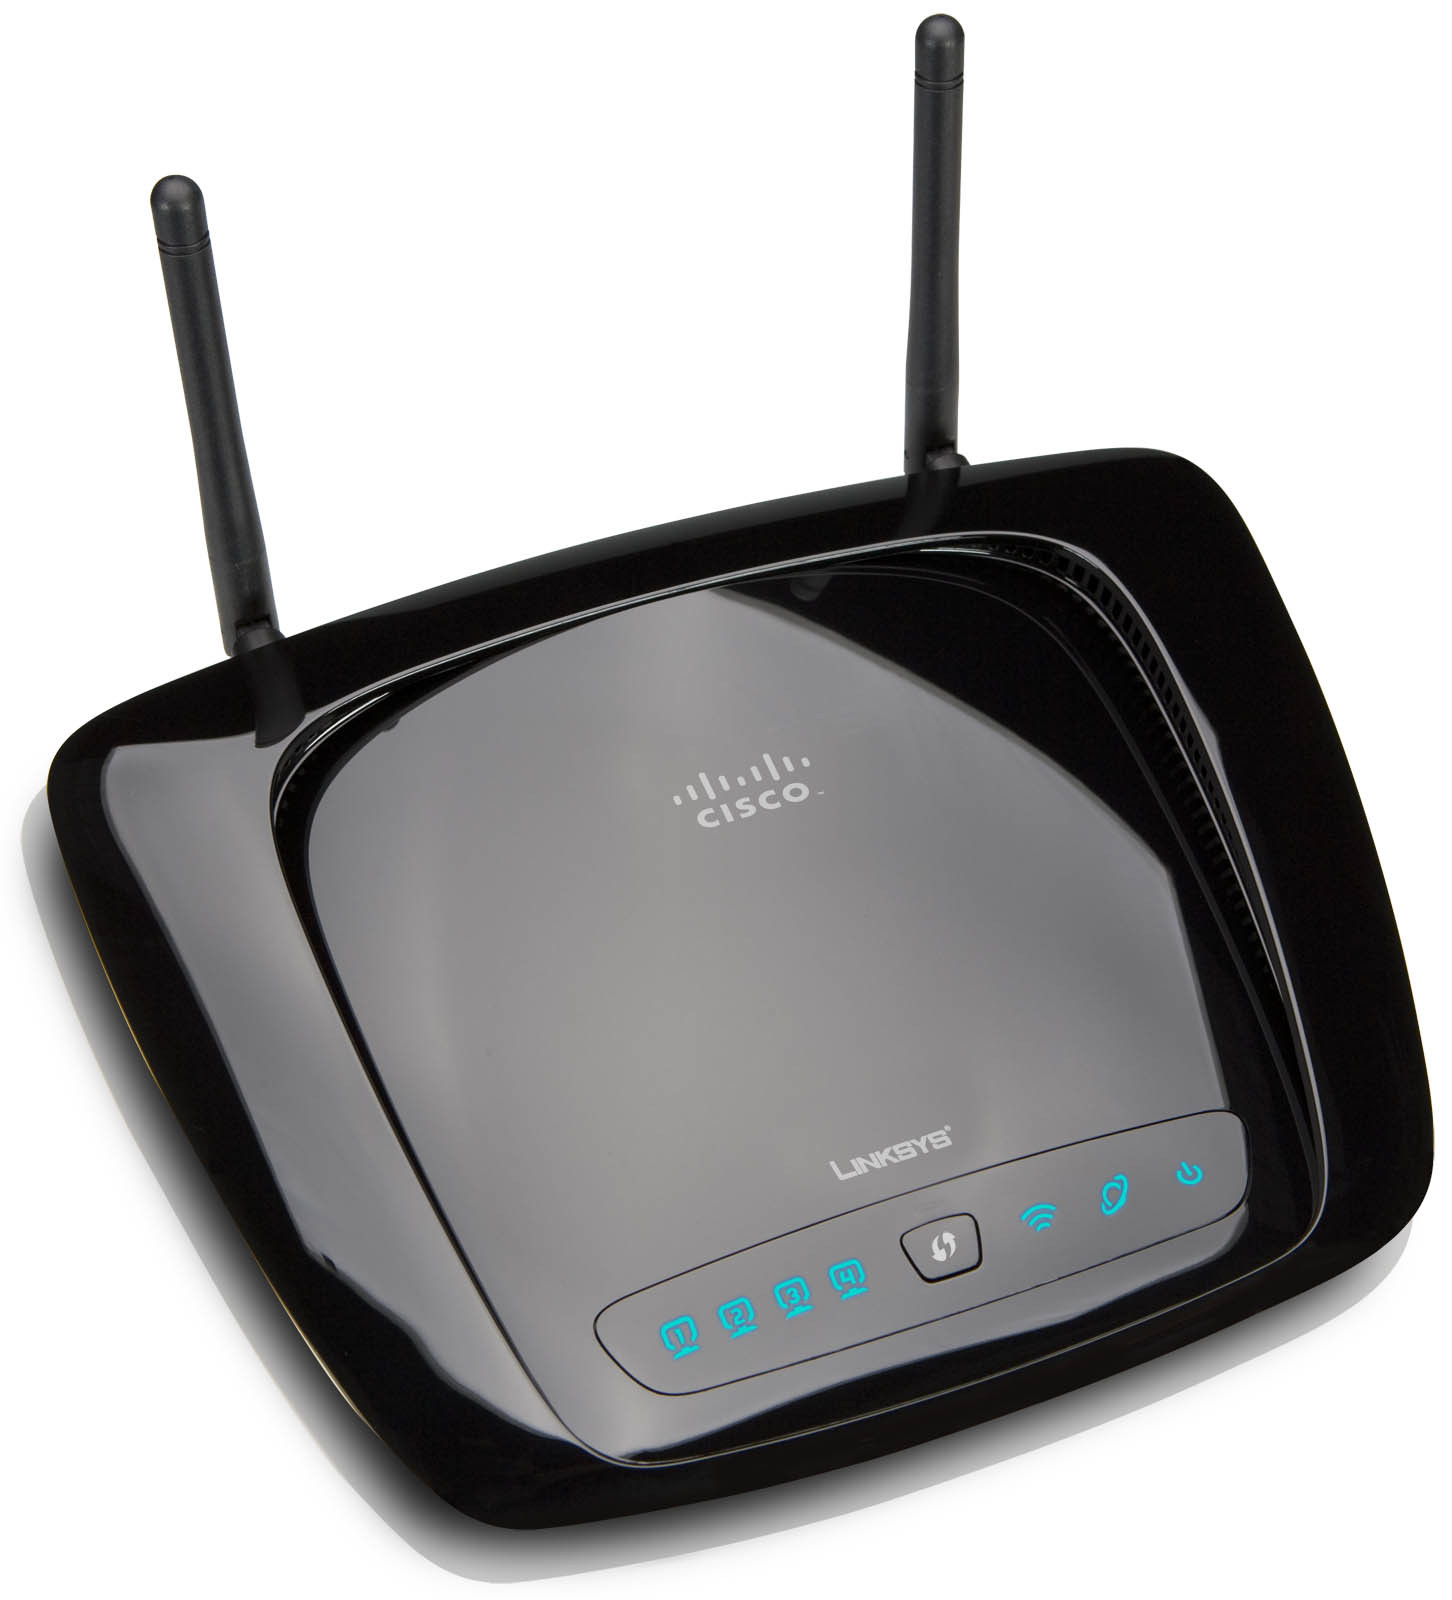 The Linksys WRT160NL wireless router.